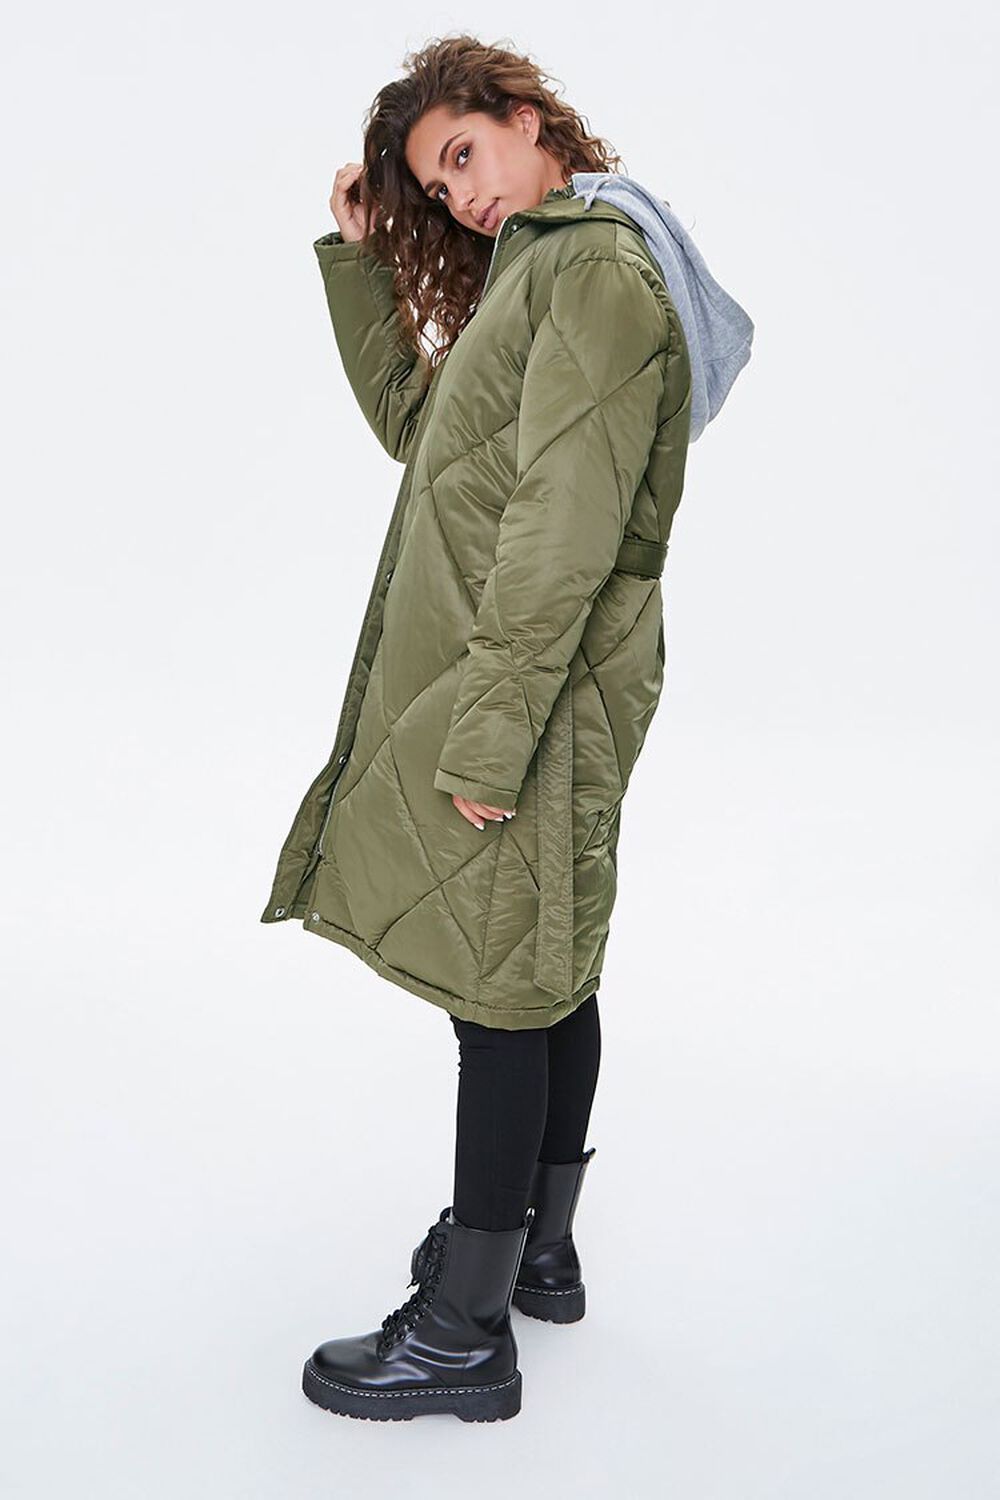 OLIVE/HEATHER GREY Longline Quilted Puffer Jacket, image 3